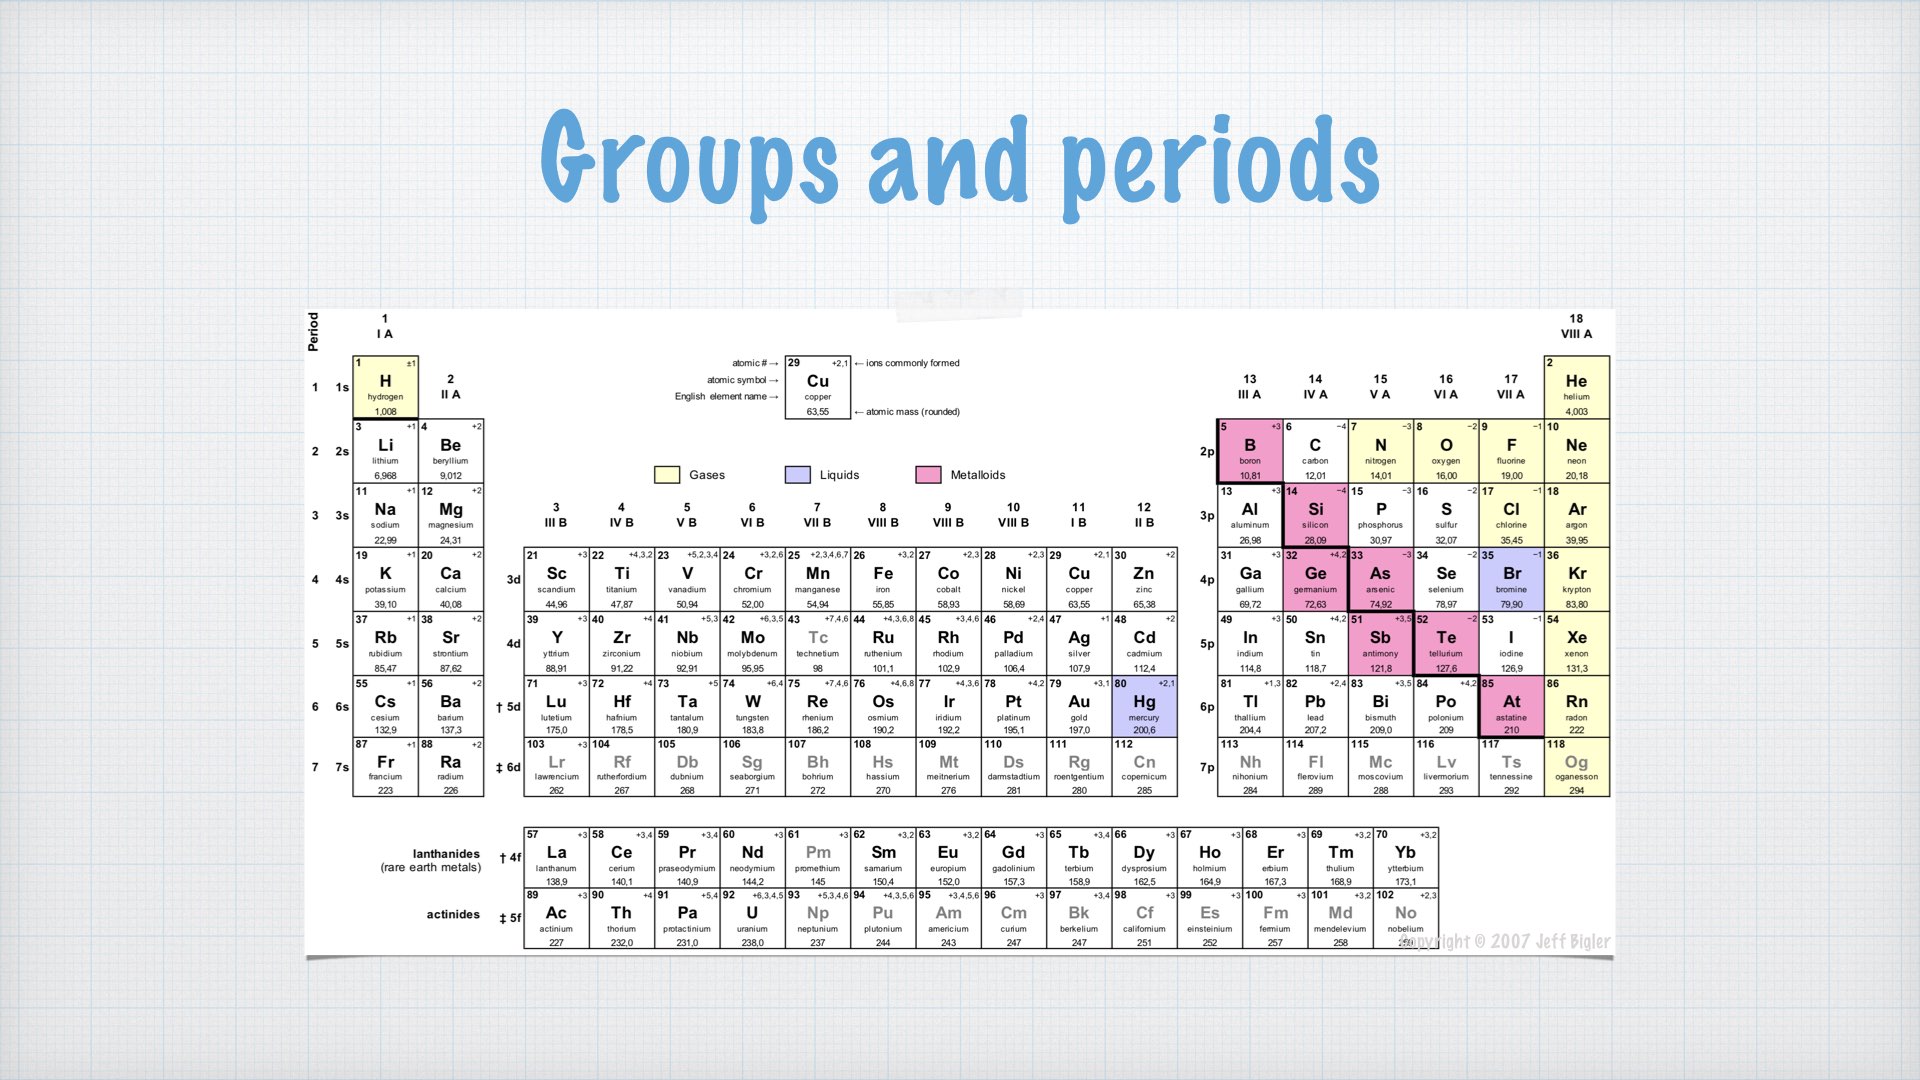 The structure of the periodic table